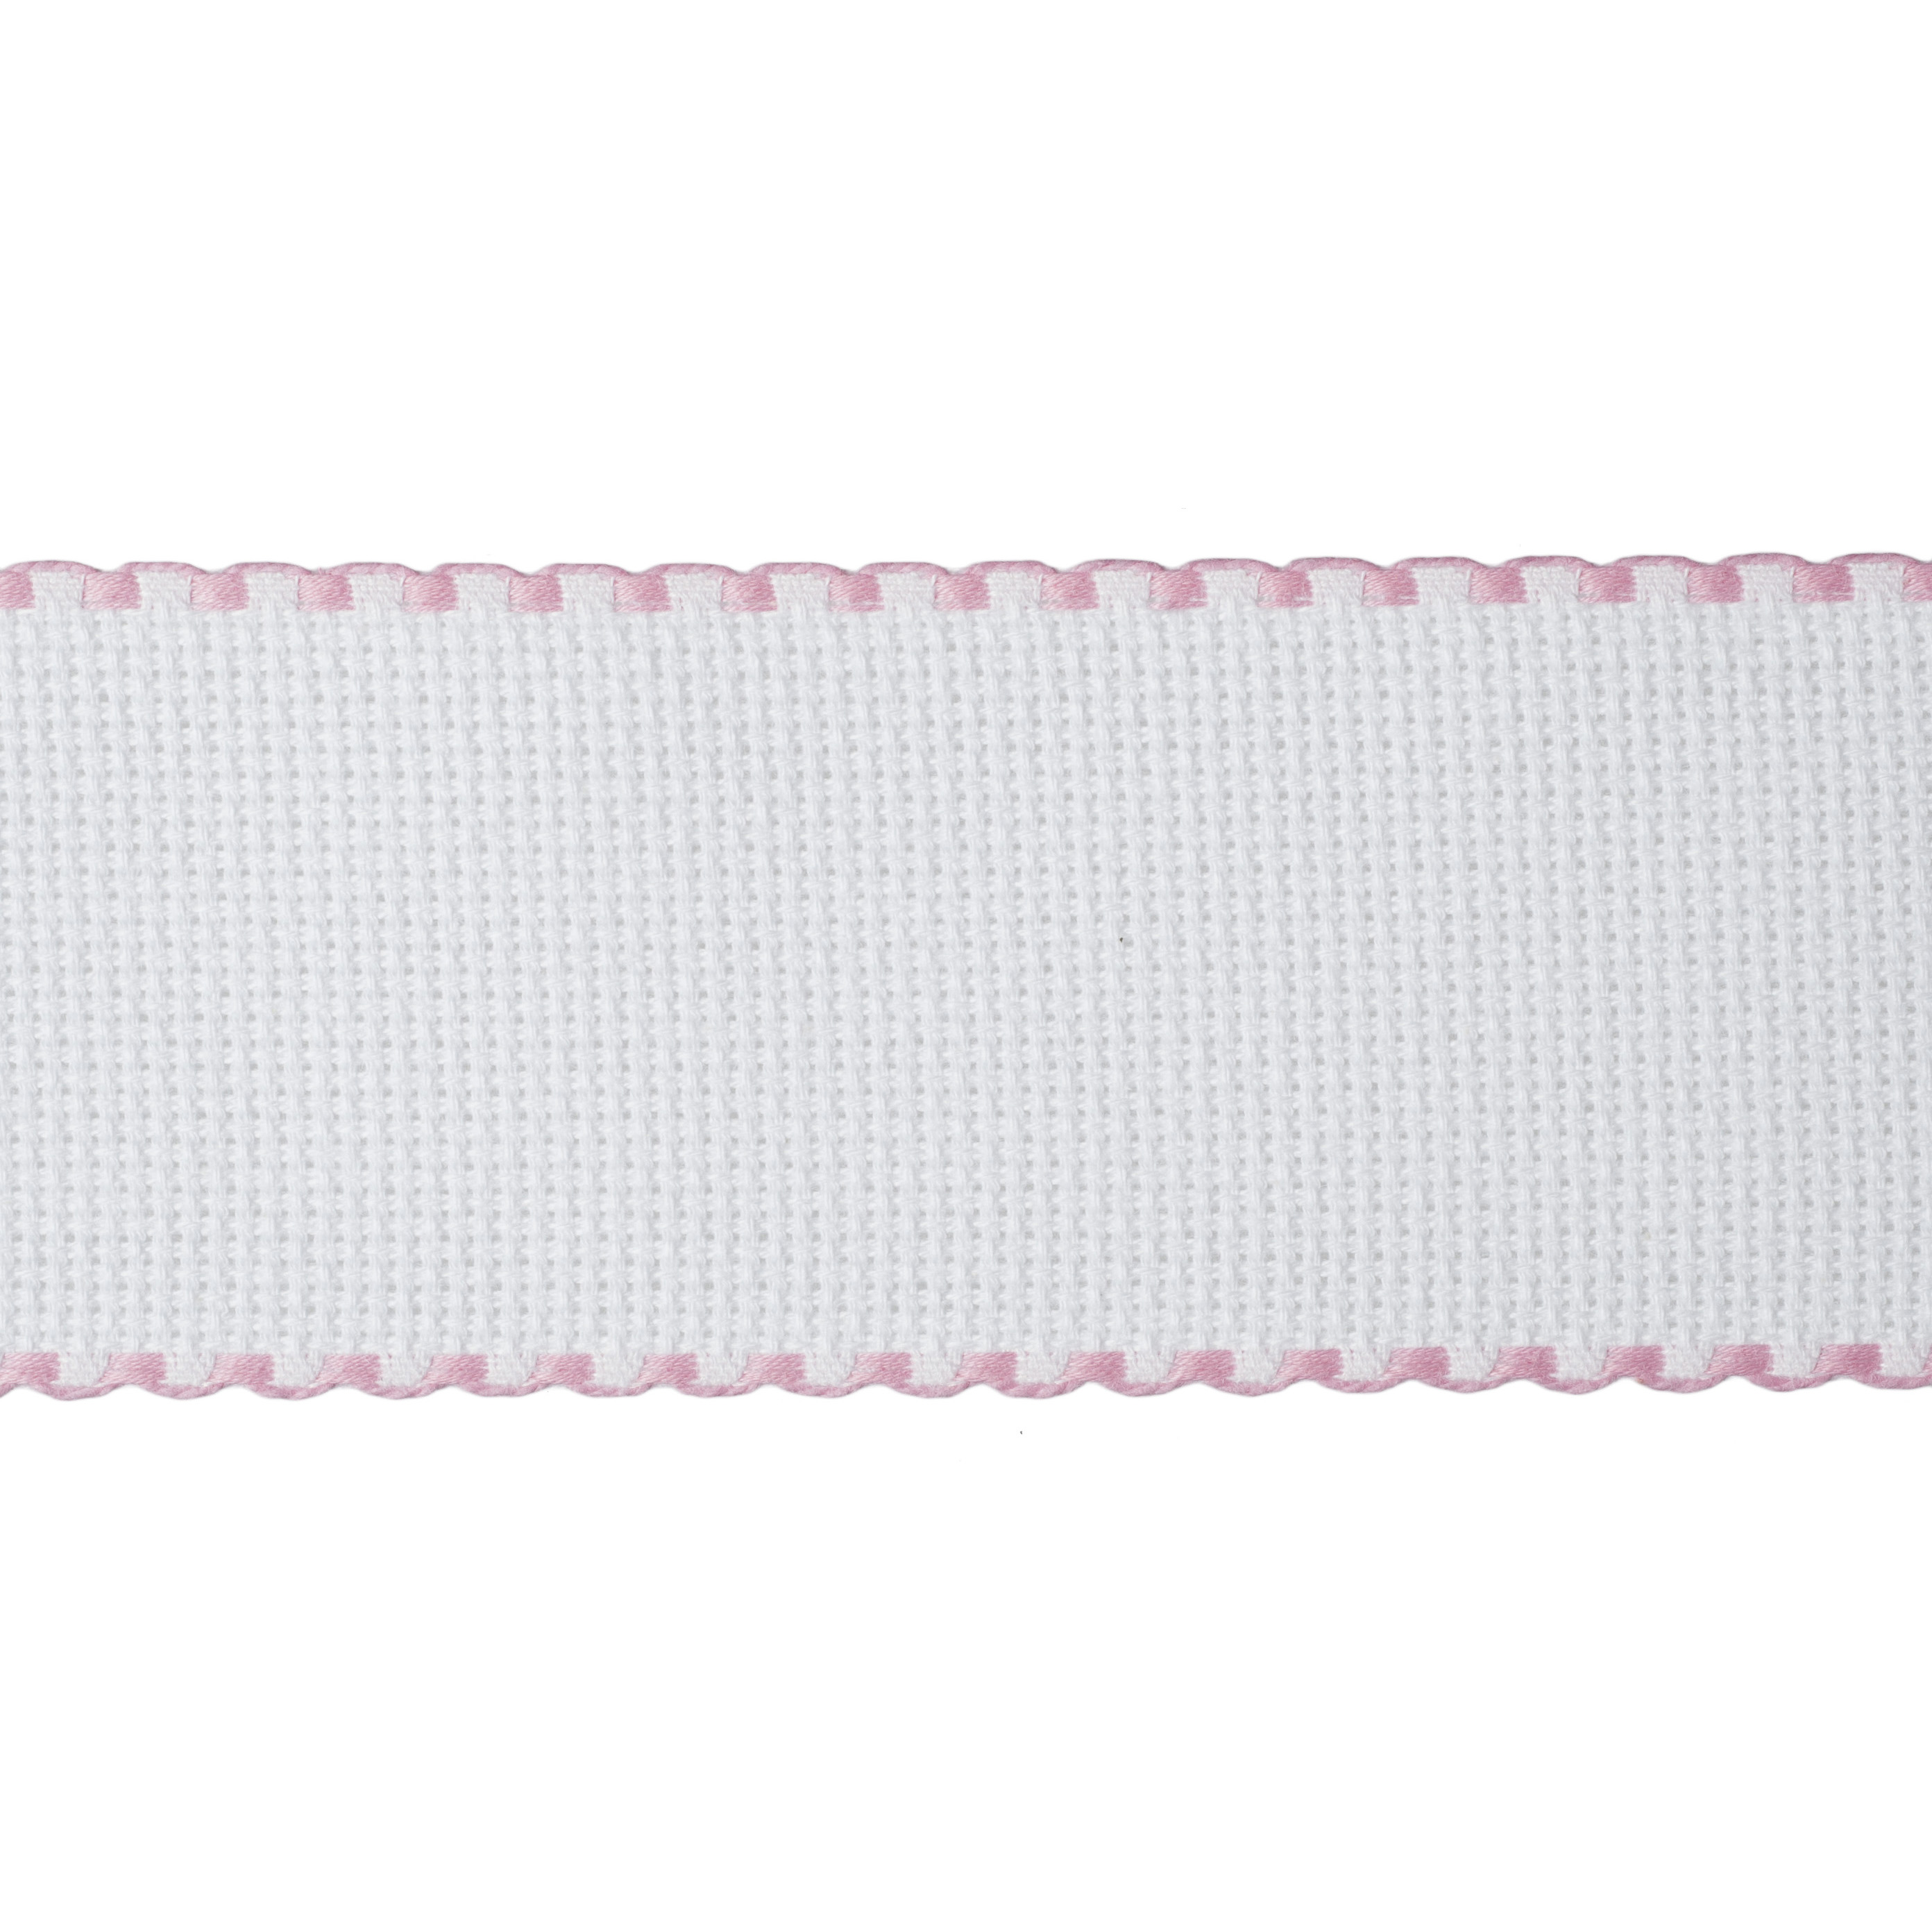 Picture of Needlecraft Fabric: Aida Band: 16 Count: 8m x 50mm: White/Pink Edging